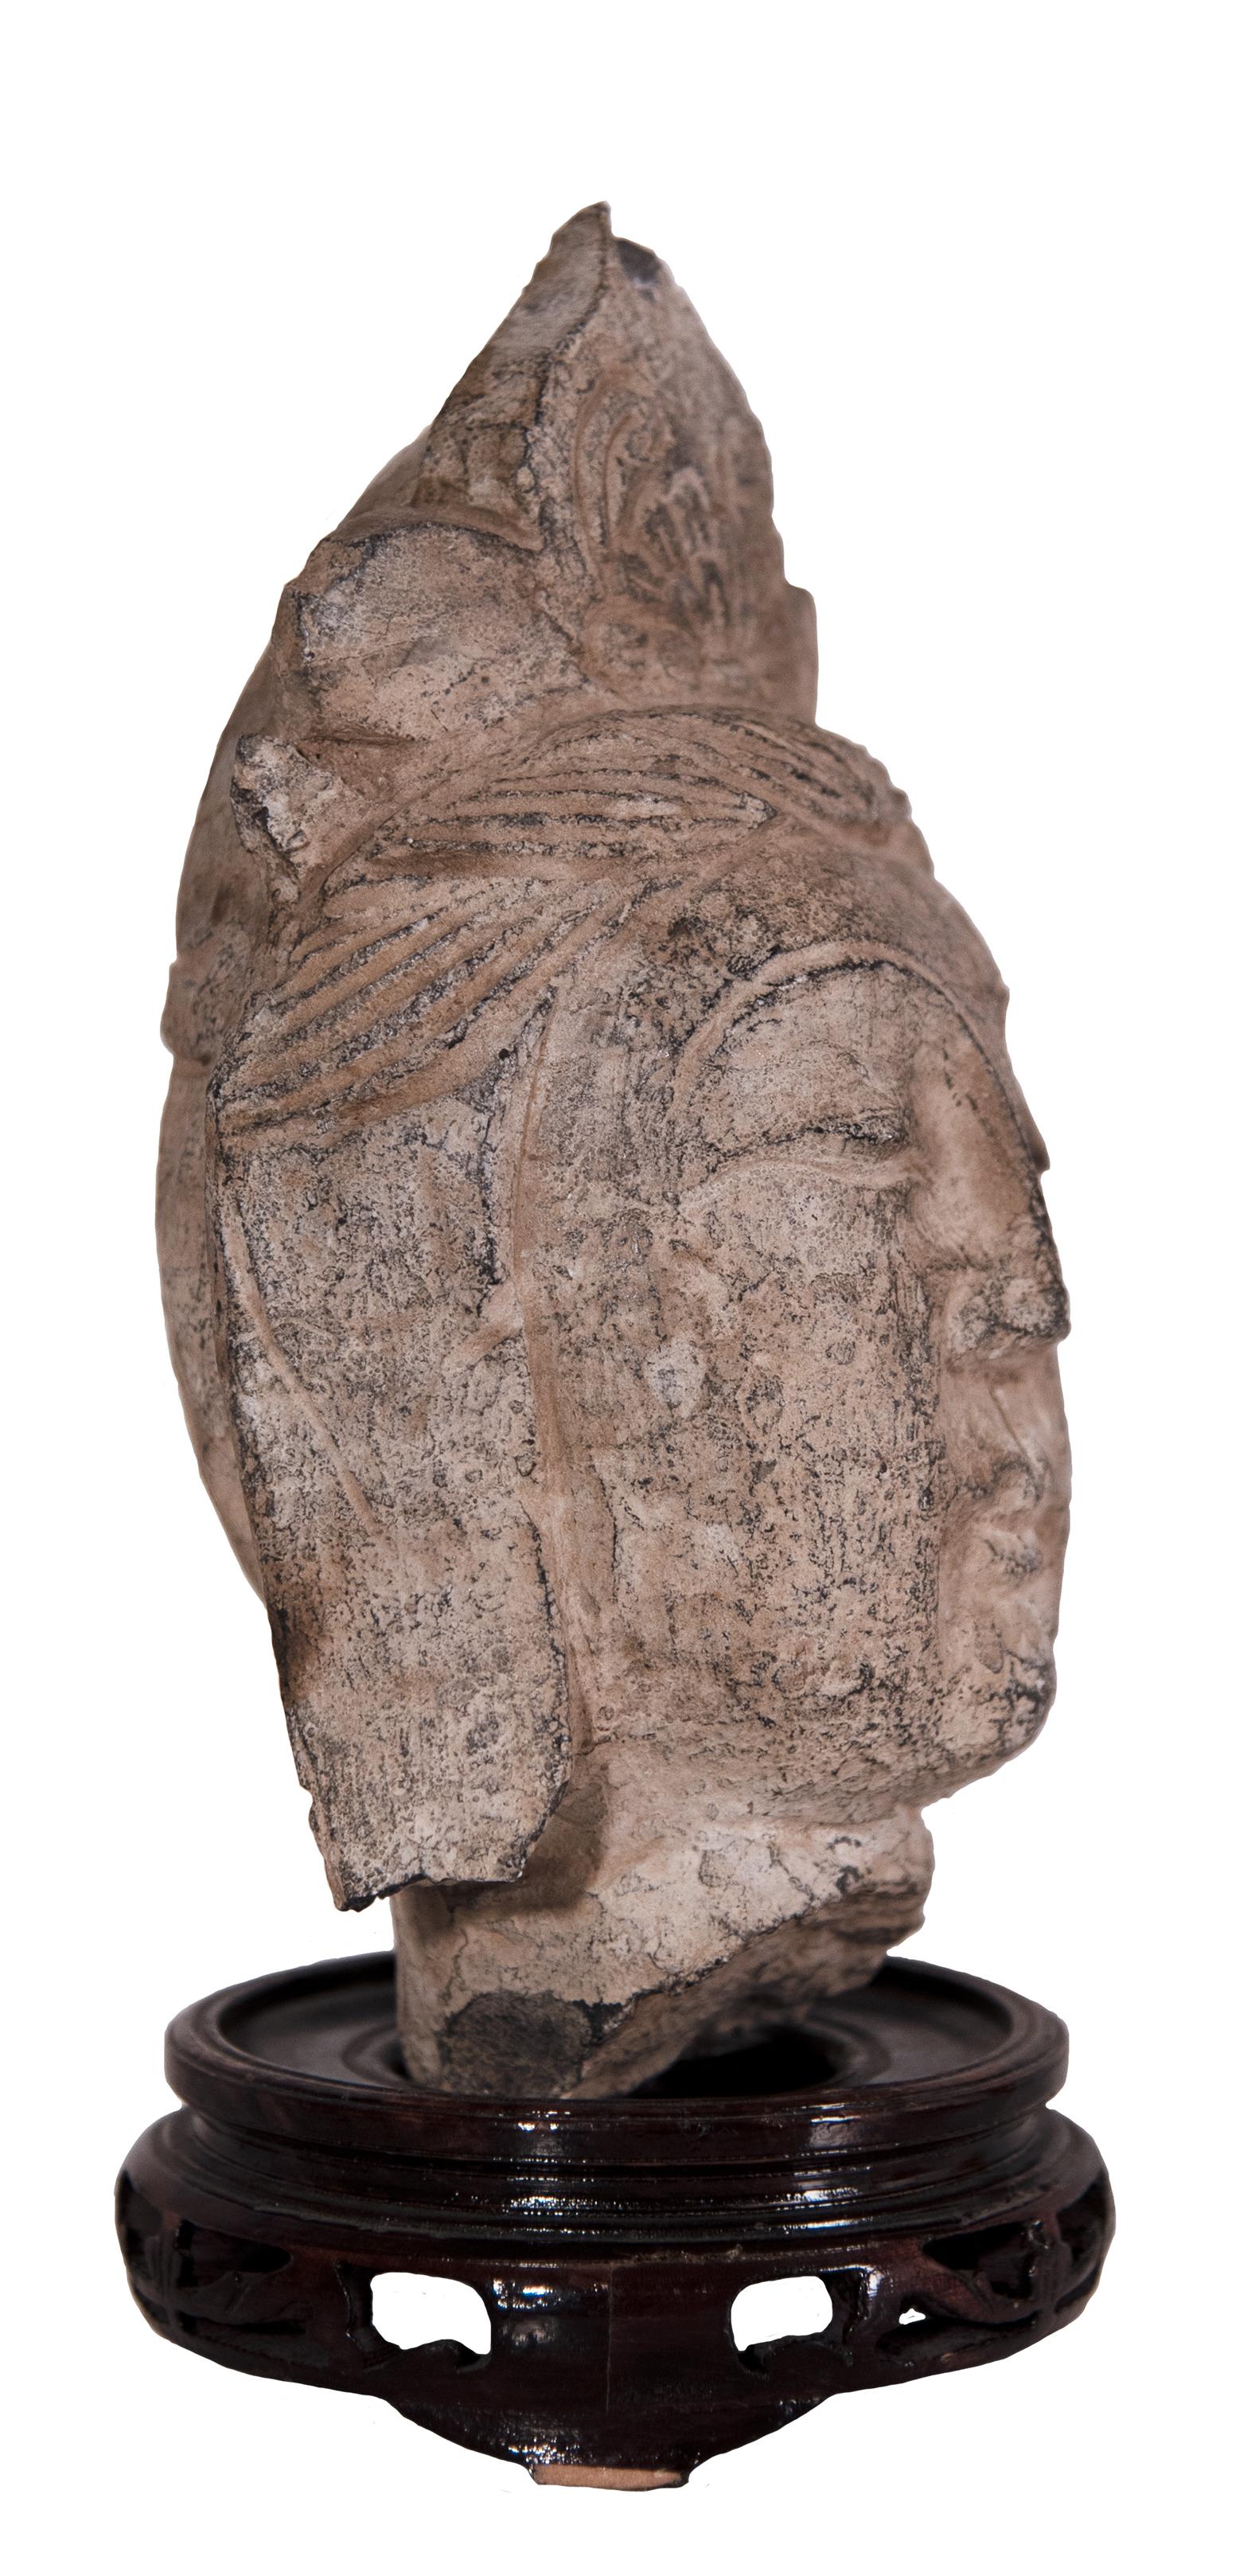 A South-East Asian stone bodhisattva head with a wood stand.

Circa 1930-40.